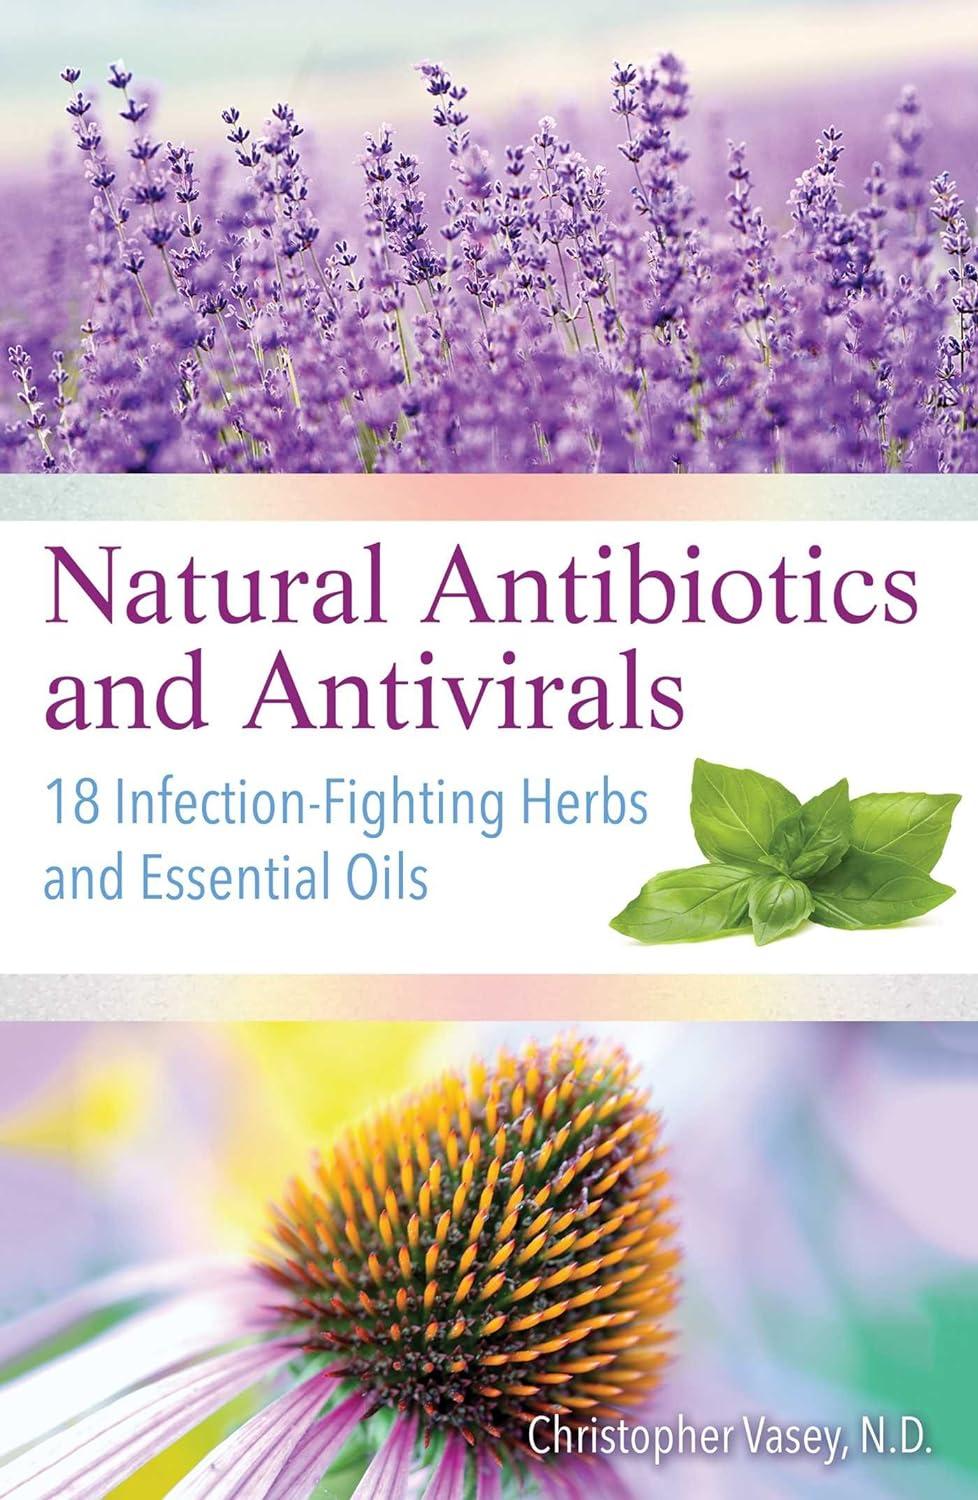 natural antibiotics and antivirals 18 infection-fighting herbs and essential oils 1st edition christopher